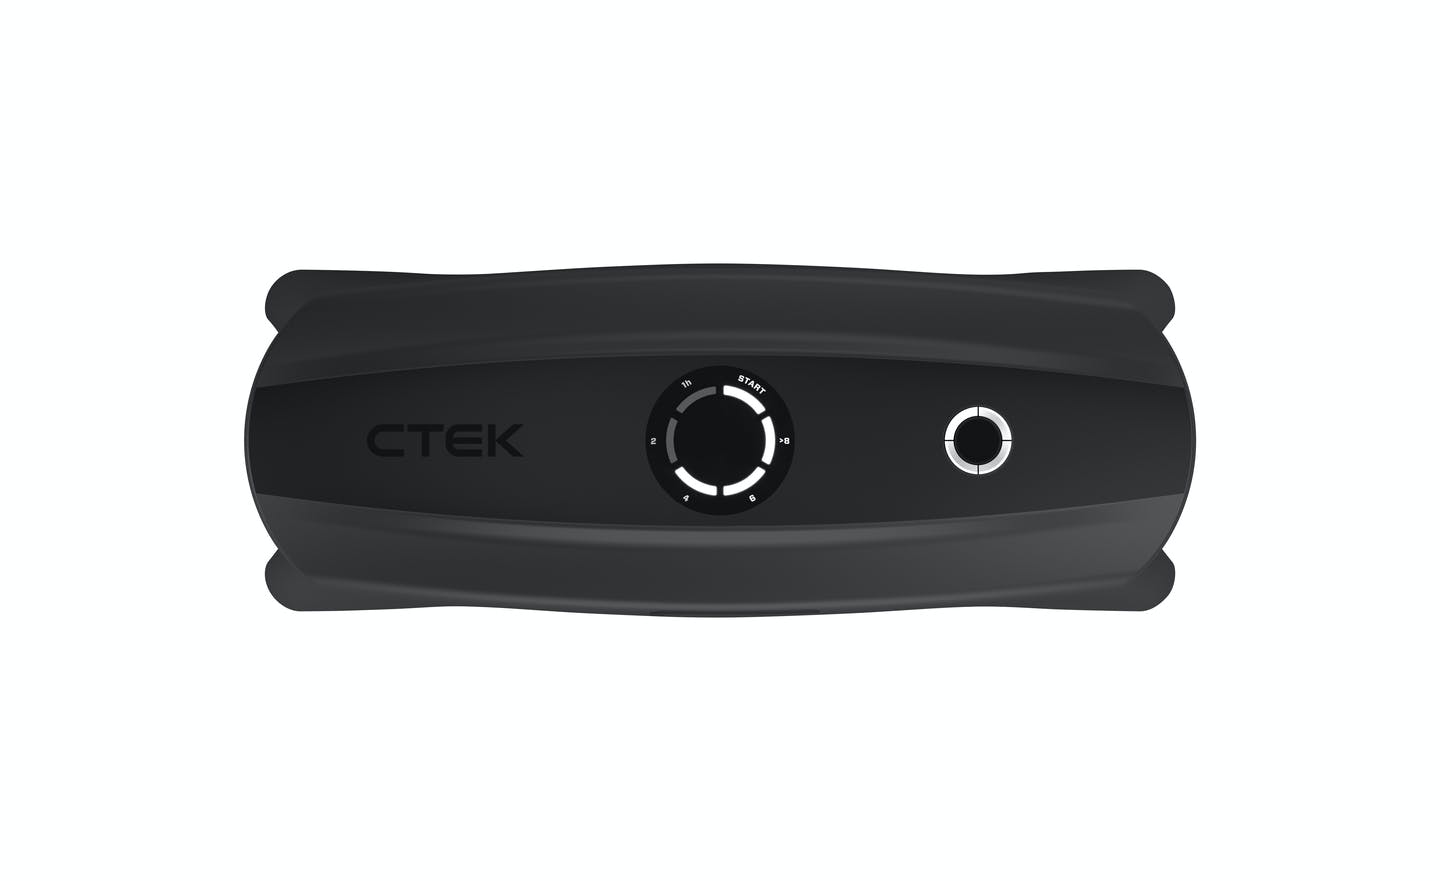 C-TEK 40-462 CTEK CS FREE Multi-functional 4-in-1 portable charger and smart maintainer with Adaptive Boost technology